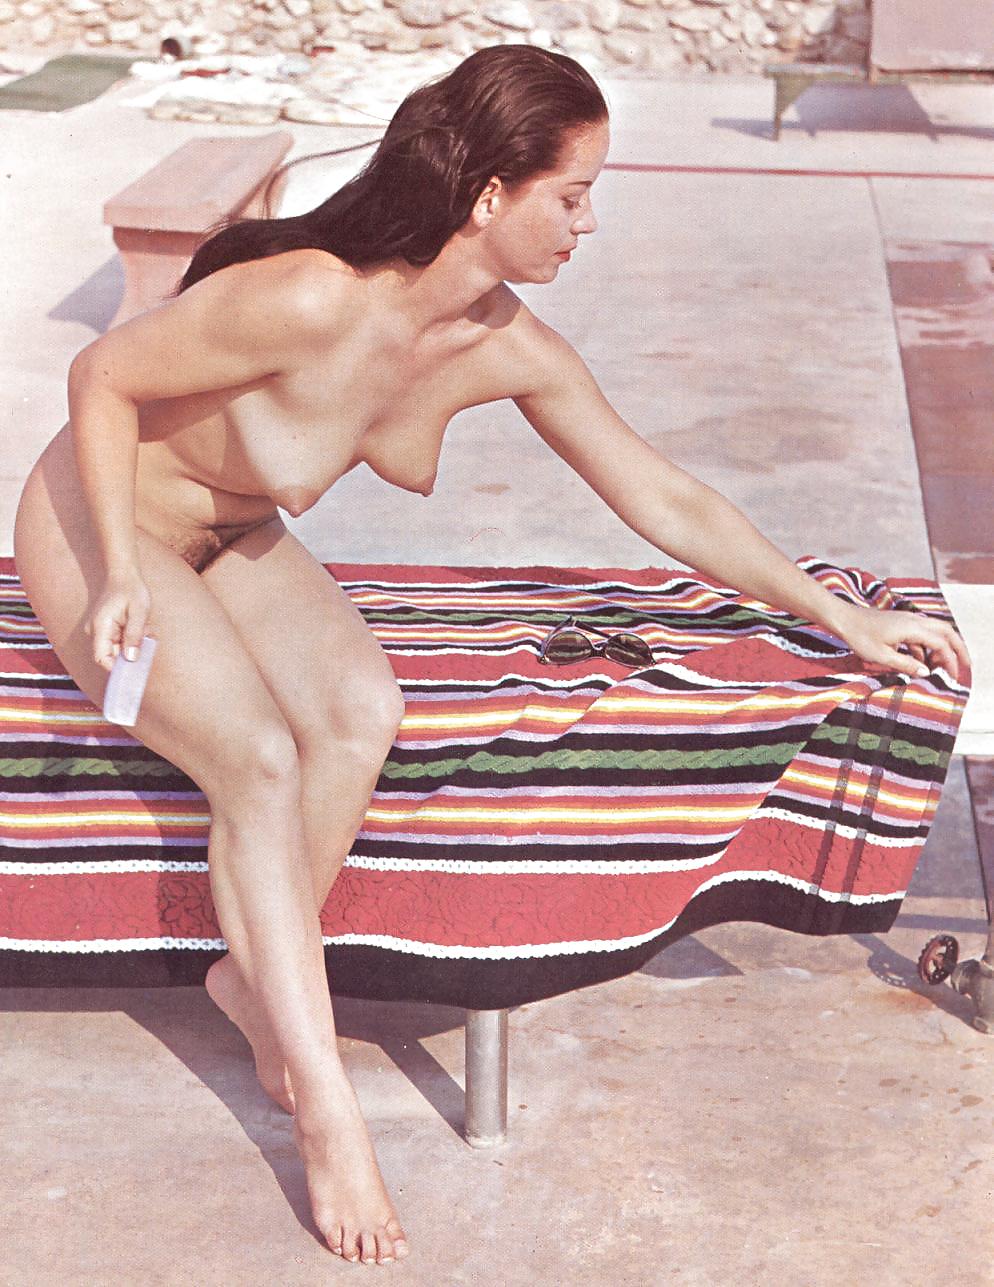 A Few Vintage Naturist Girls That Really Turn Me On (3) #16485317